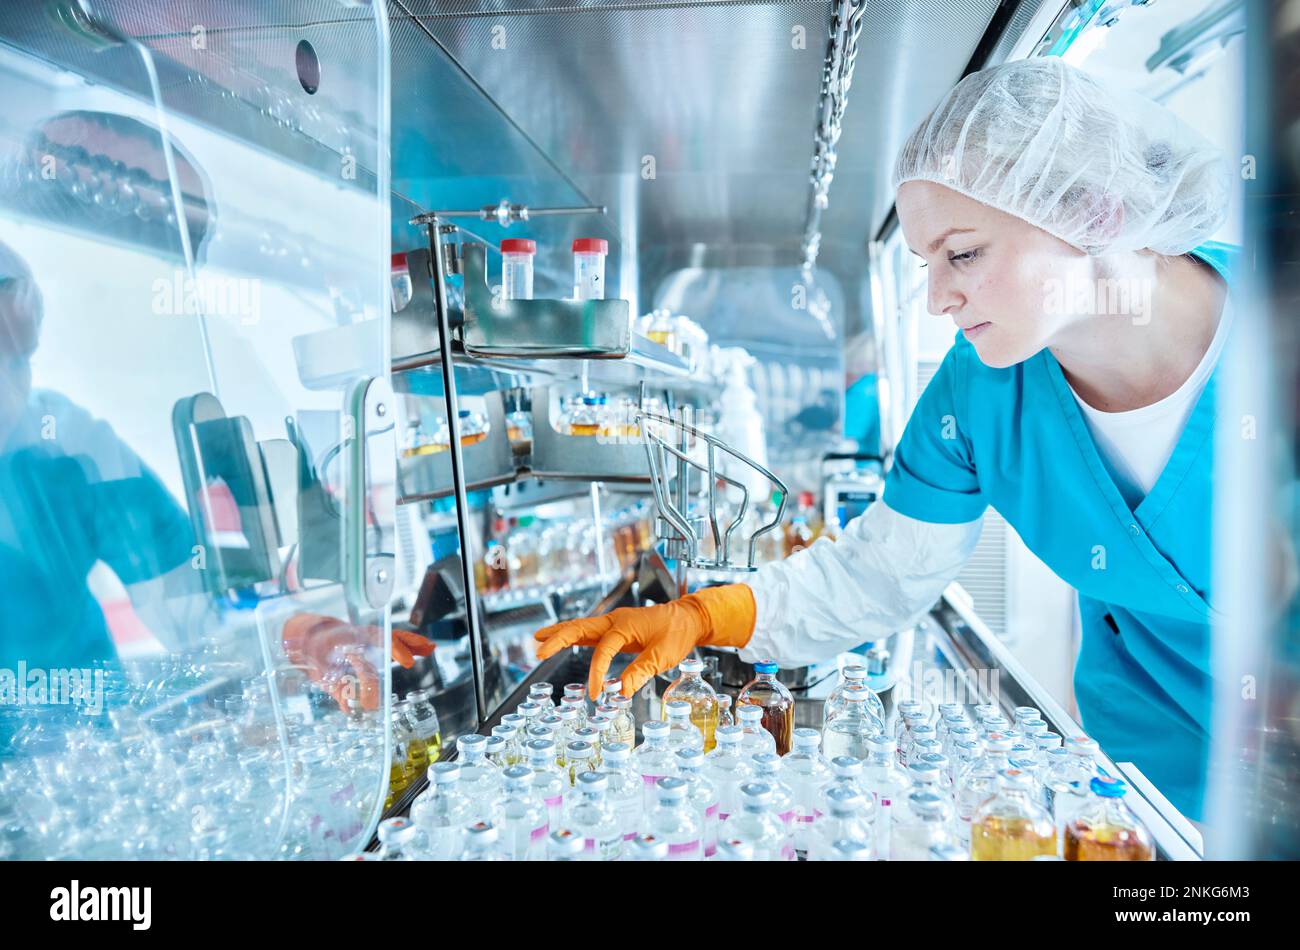 Female scientist working in cleanroom of a microbiological lab Stock Photo